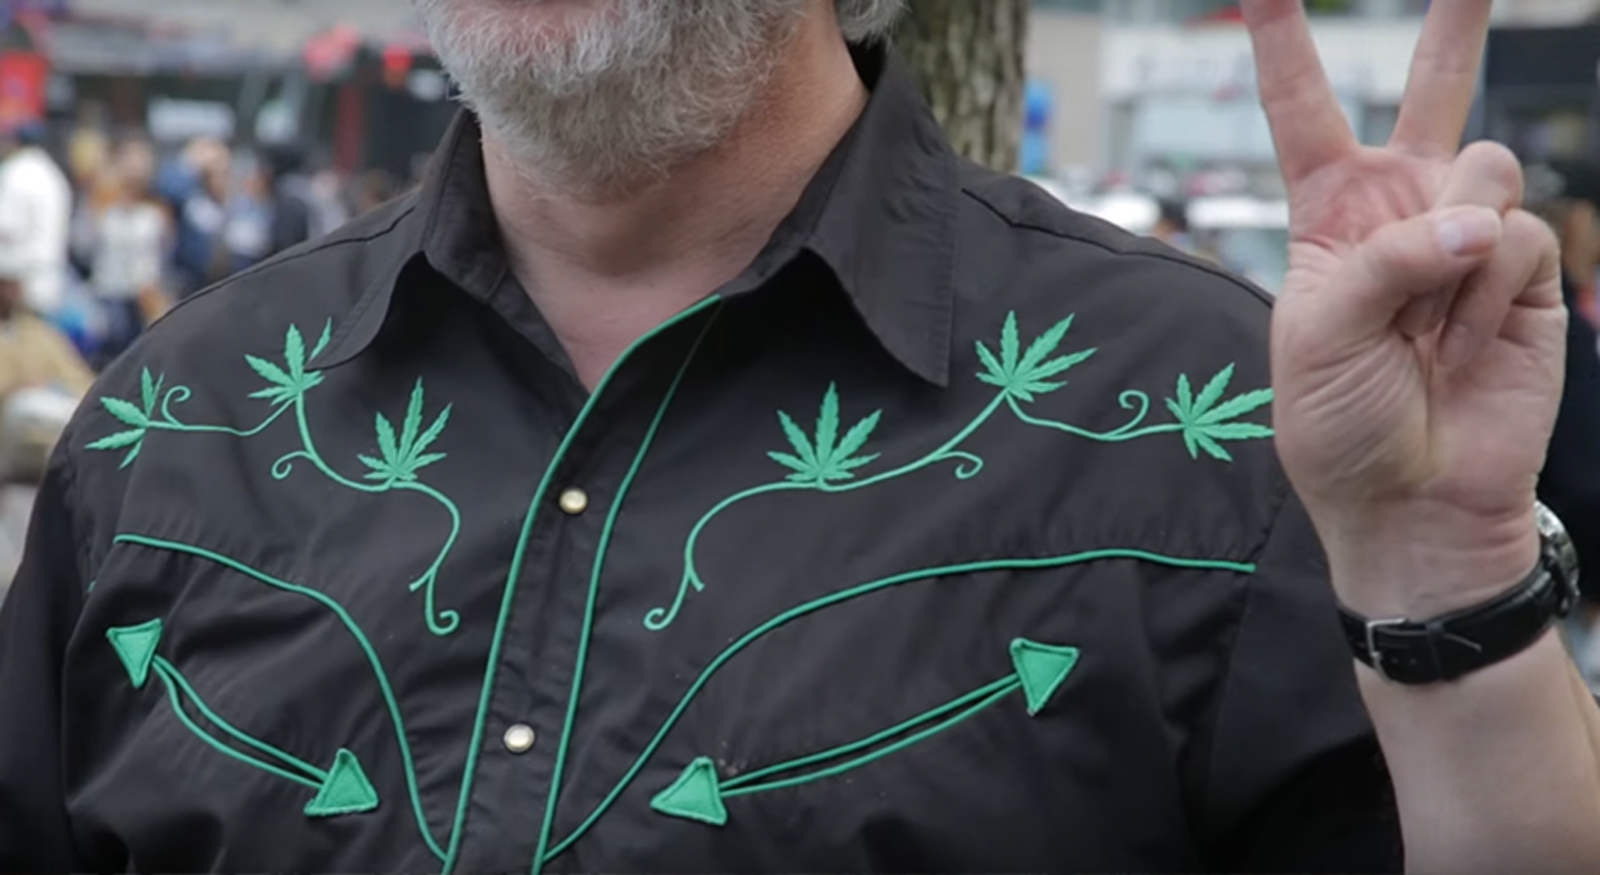 The Most Stylish Stoners at the NYC Cannabis Parade